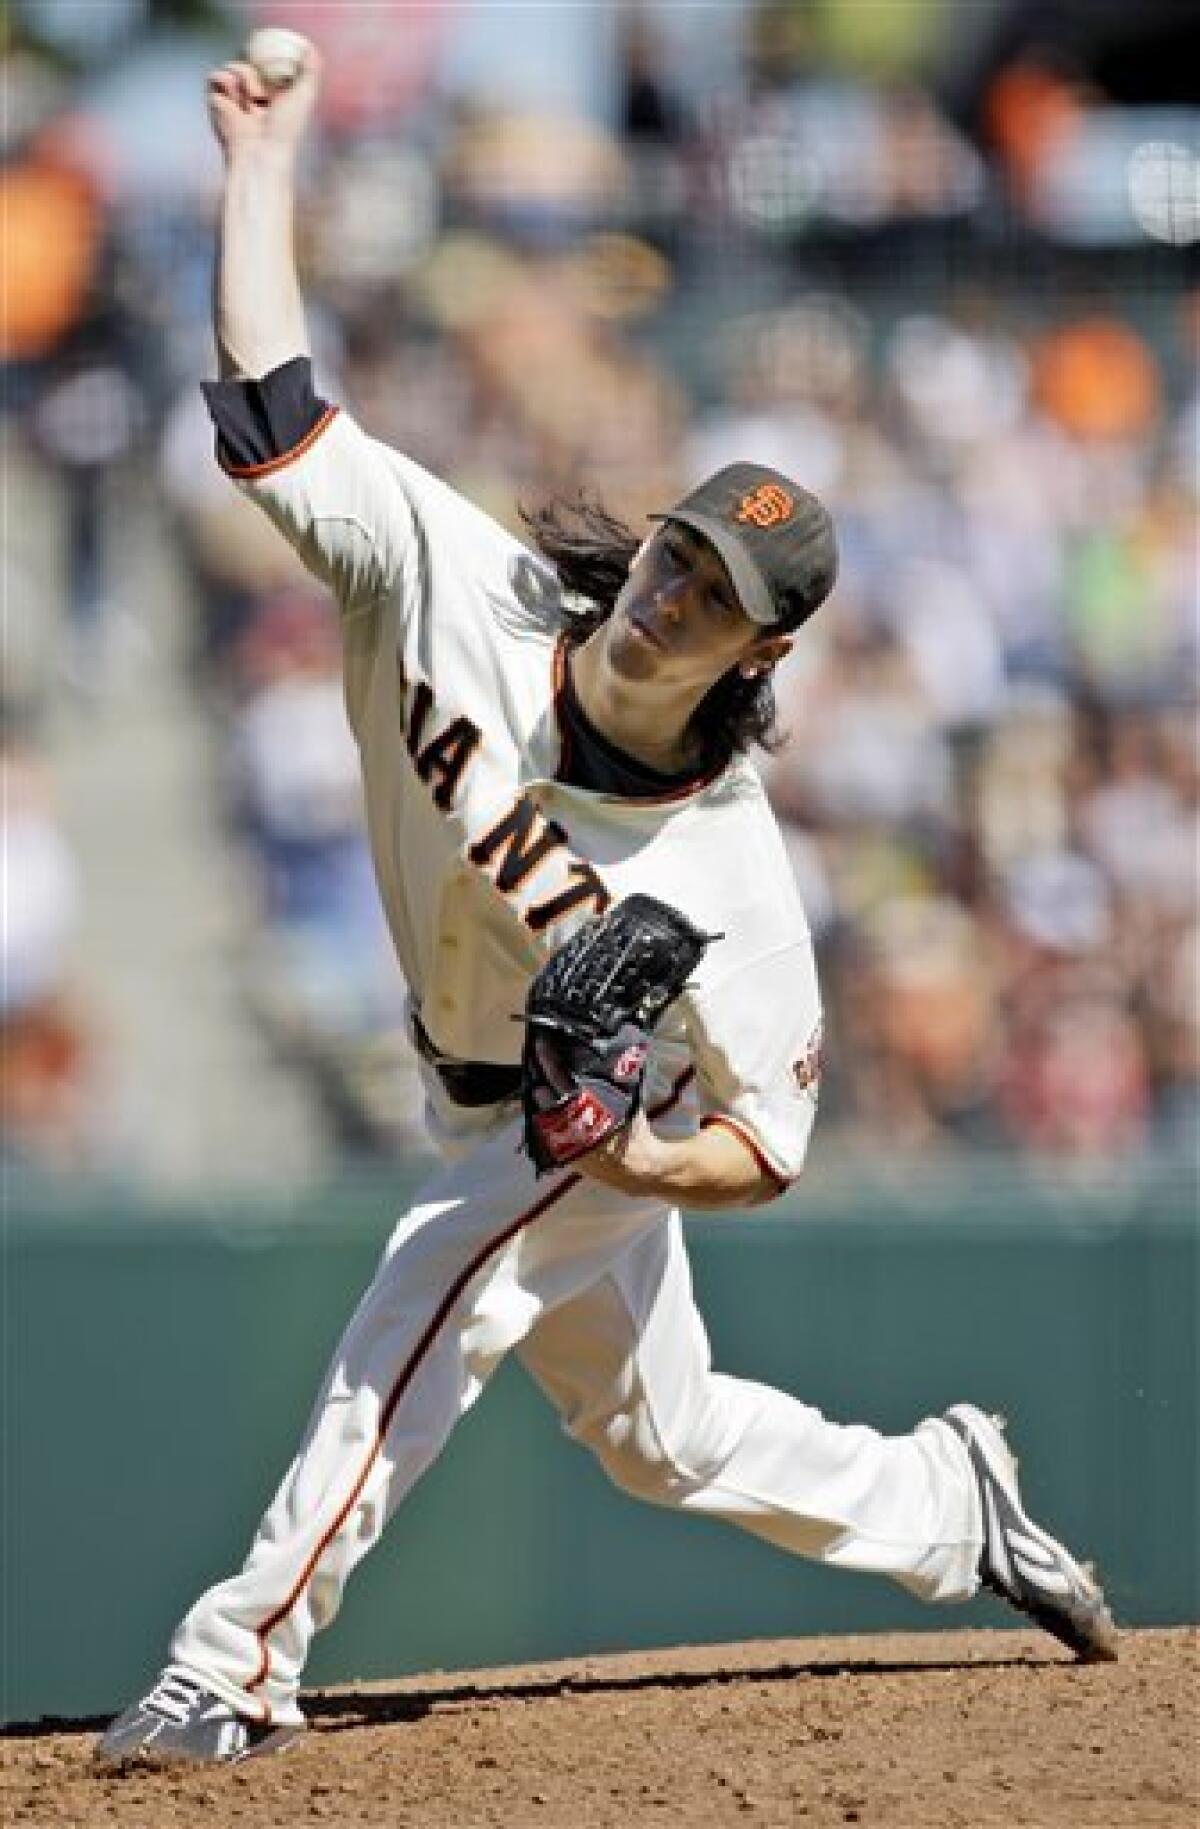 What Happened To Tim Lincecum? Here's A Look At The Pitcher's Career